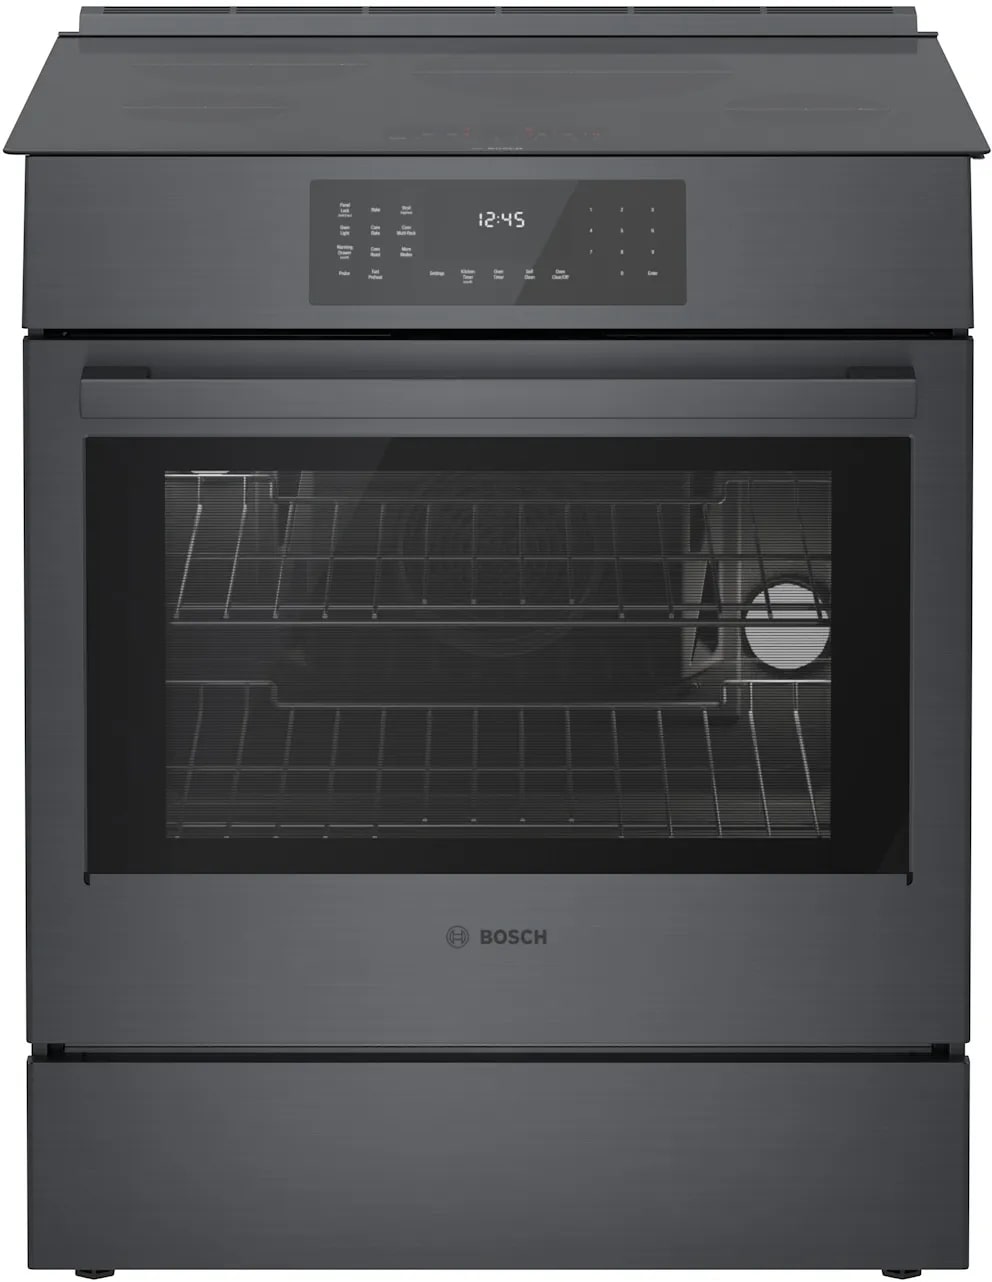 Bosch - 4.6 cu. ft  Induction Range in Black Stainless - HII8047C